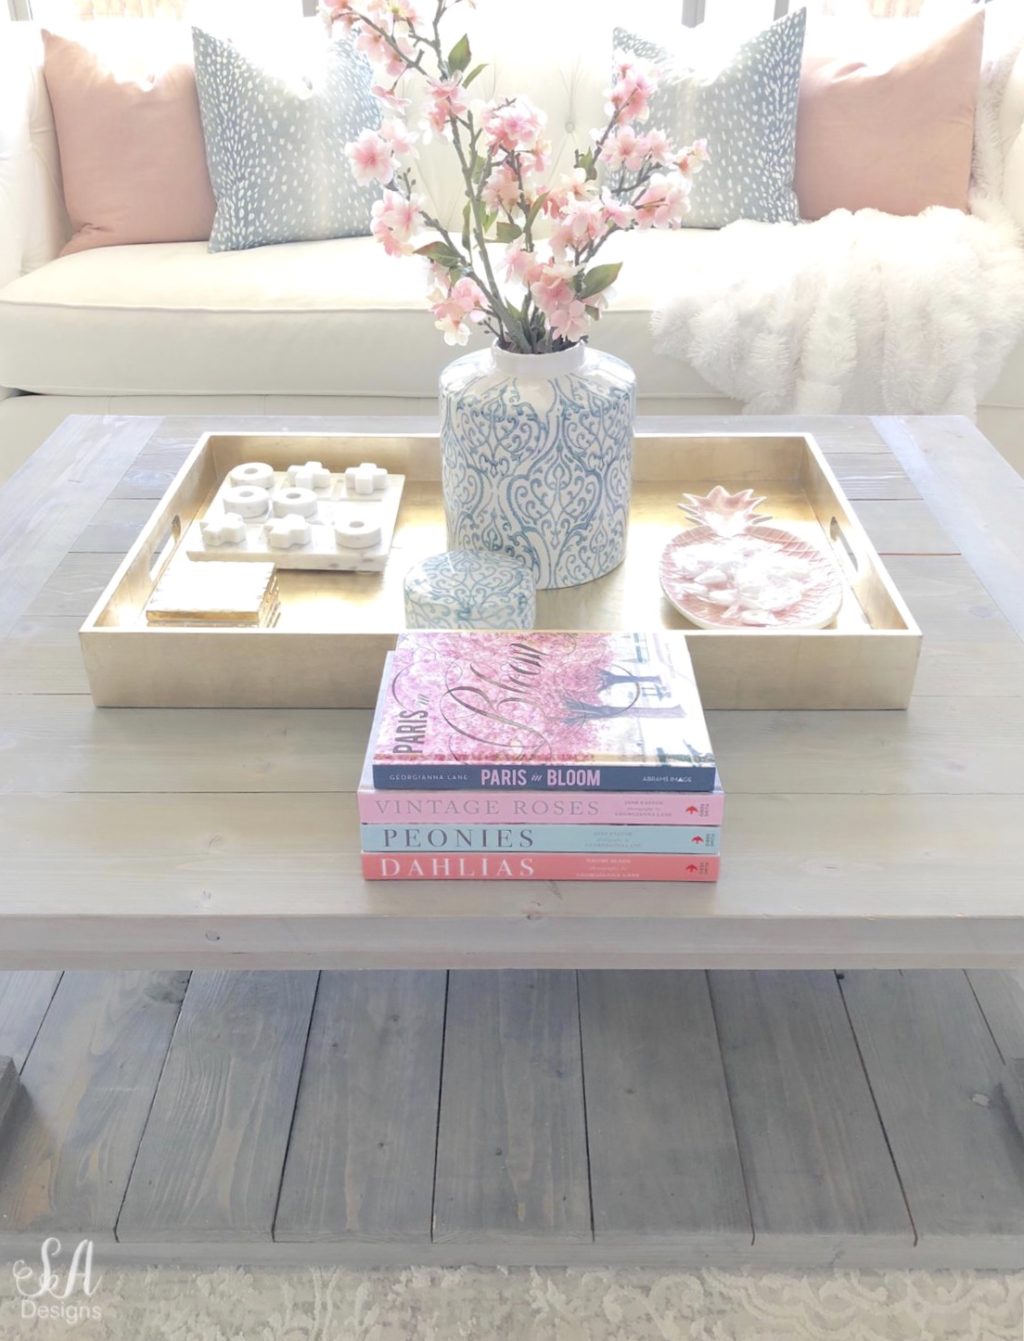 Prettiest Books To Style Your Coffee Table & Style Your Home - Summer Adams